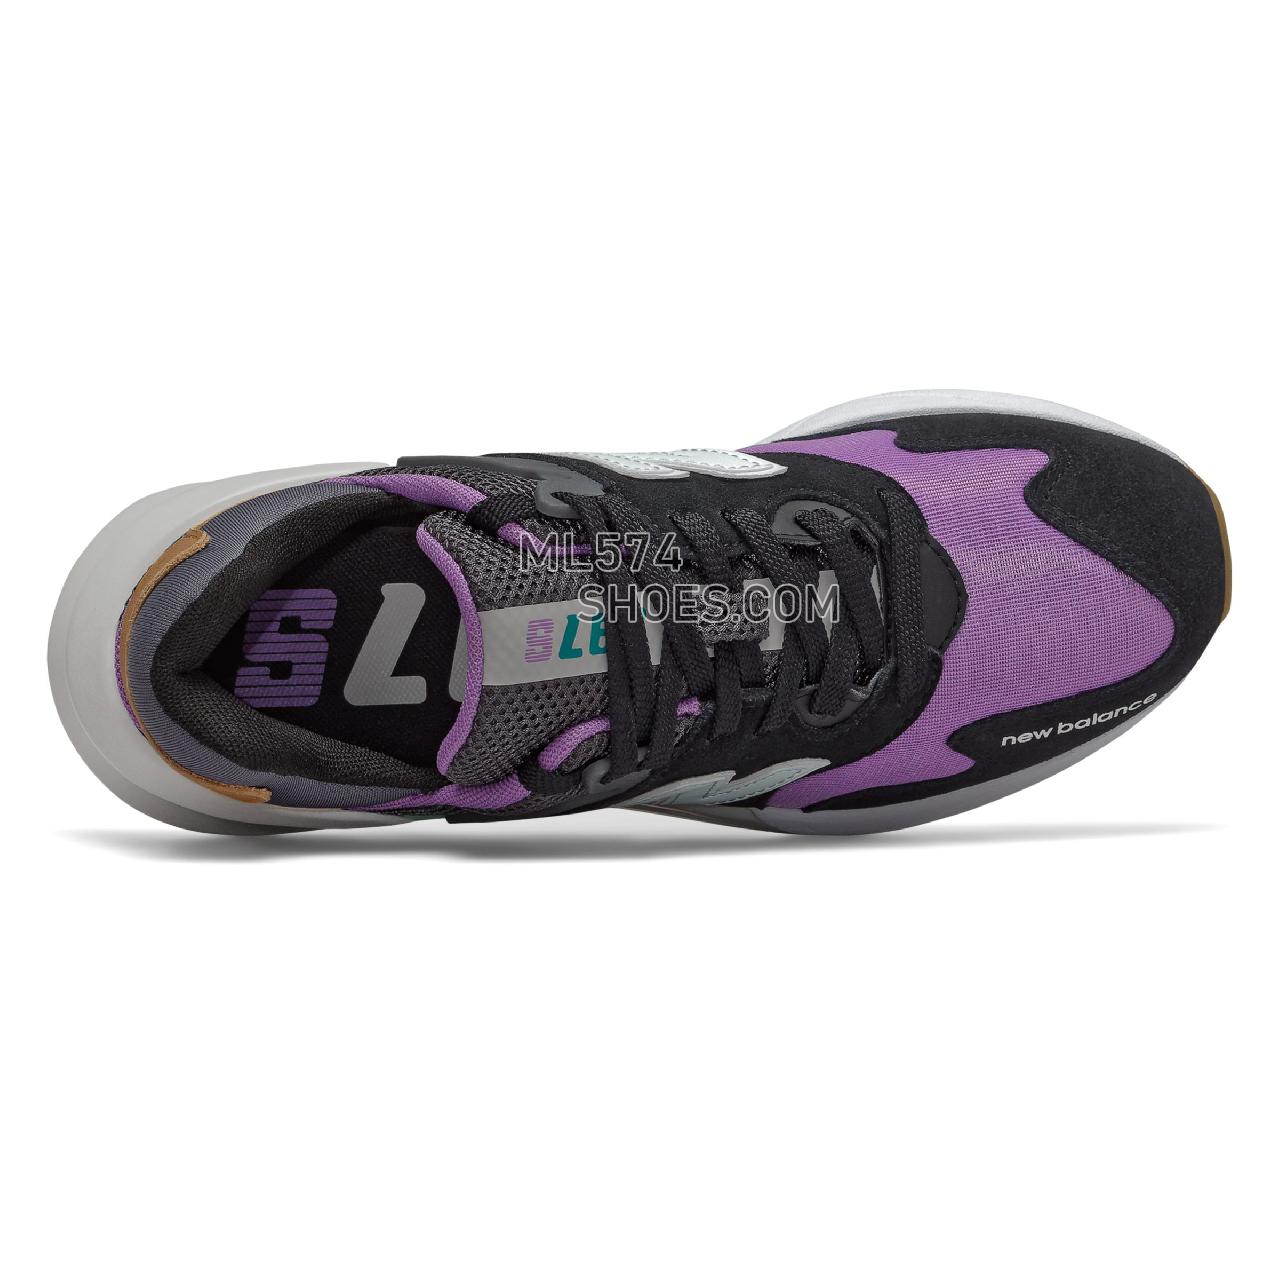 New Balance 997 Sport - Women's Sport Style Sneakers - Black with Neo Violet - WS997JGC